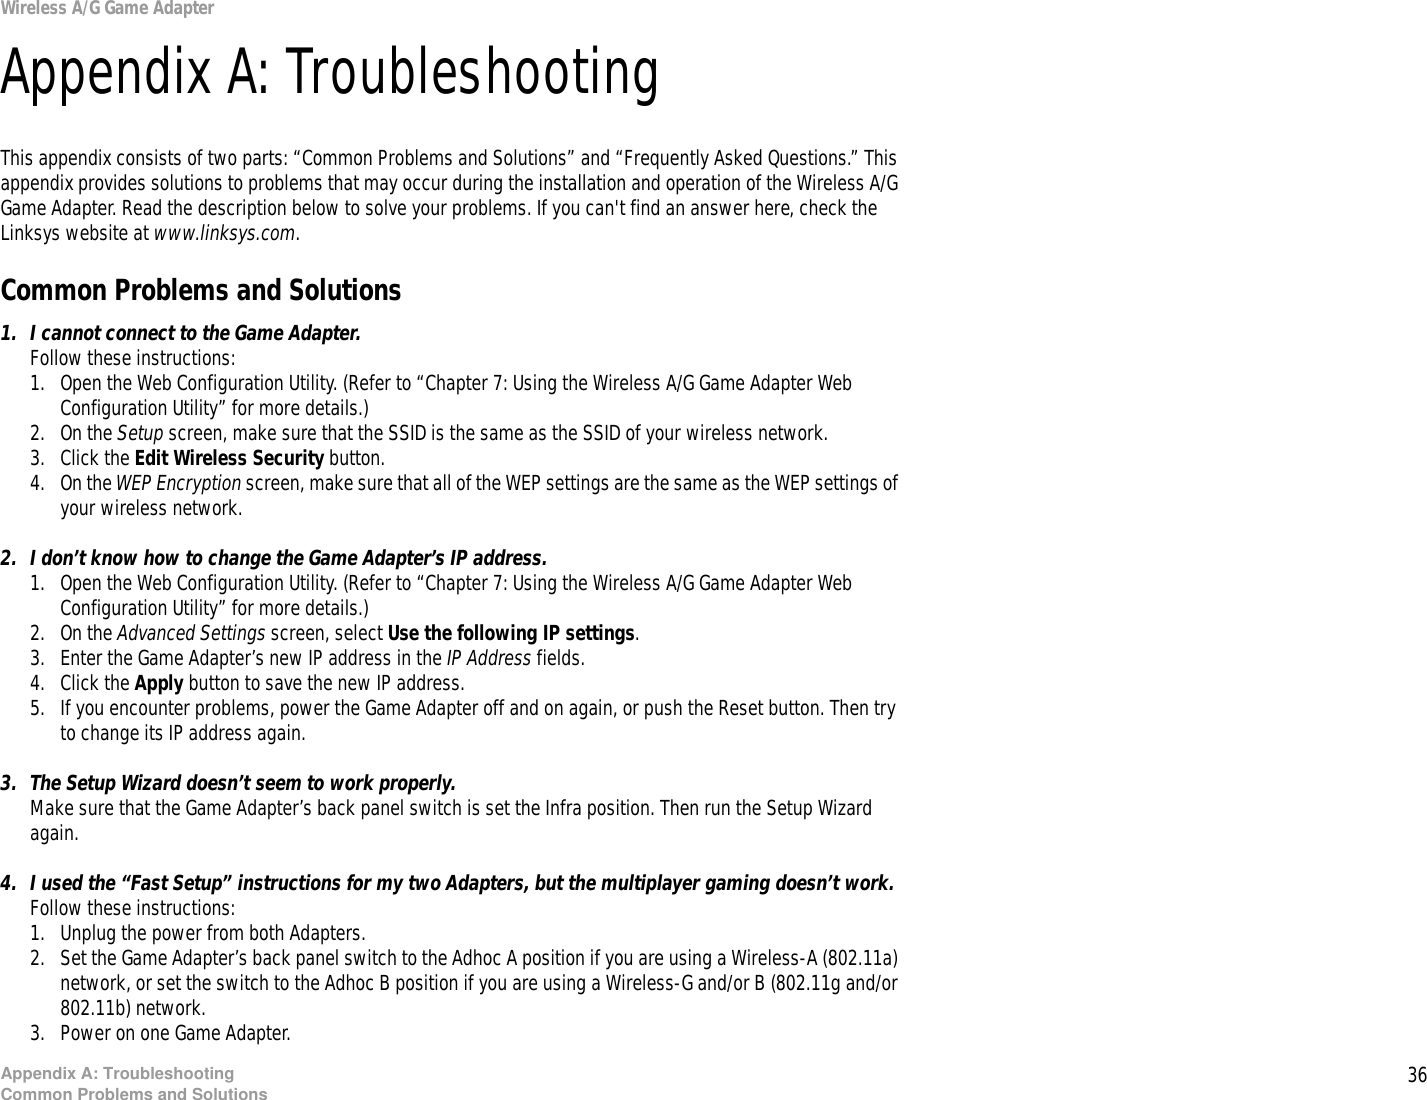 36Appendix A: TroubleshootingCommon Problems and SolutionsWireless A/G Game AdapterAppendix A: TroubleshootingThis appendix consists of two parts: “Common Problems and Solutions” and “Frequently Asked Questions.” This appendix provides solutions to problems that may occur during the installation and operation of the Wireless A/G Game Adapter. Read the description below to solve your problems. If you can&apos;t find an answer here, check the Linksys website at www.linksys.com.Common Problems and Solutions1. I cannot connect to the Game Adapter.Follow these instructions:1. Open the Web Configuration Utility. (Refer to “Chapter 7: Using the Wireless A/G Game Adapter Web Configuration Utility” for more details.)2. On the Setup screen, make sure that the SSID is the same as the SSID of your wireless network.3. Click the Edit Wireless Security button.4. On the WEP Encryption screen, make sure that all of the WEP settings are the same as the WEP settings of your wireless network.2. I don’t know how to change the Game Adapter’s IP address.1. Open the Web Configuration Utility. (Refer to “Chapter 7: Using the Wireless A/G Game Adapter Web Configuration Utility” for more details.)2. On the Advanced Settings screen, select Use the following IP settings. 3. Enter the Game Adapter’s new IP address in the IP Address fields.4. Click the Apply button to save the new IP address.5. If you encounter problems, power the Game Adapter off and on again, or push the Reset button. Then try to change its IP address again.3. The Setup Wizard doesn’t seem to work properly.Make sure that the Game Adapter’s back panel switch is set the Infra position. Then run the Setup Wizard again.4. I used the “Fast Setup” instructions for my two Adapters, but the multiplayer gaming doesn’t work.Follow these instructions:1. Unplug the power from both Adapters.2. Set the Game Adapter’s back panel switch to the Adhoc A position if you are using a Wireless-A (802.11a) network, or set the switch to the Adhoc B position if you are using a Wireless-G and/or B (802.11g and/or 802.11b) network.3. Power on one Game Adapter.